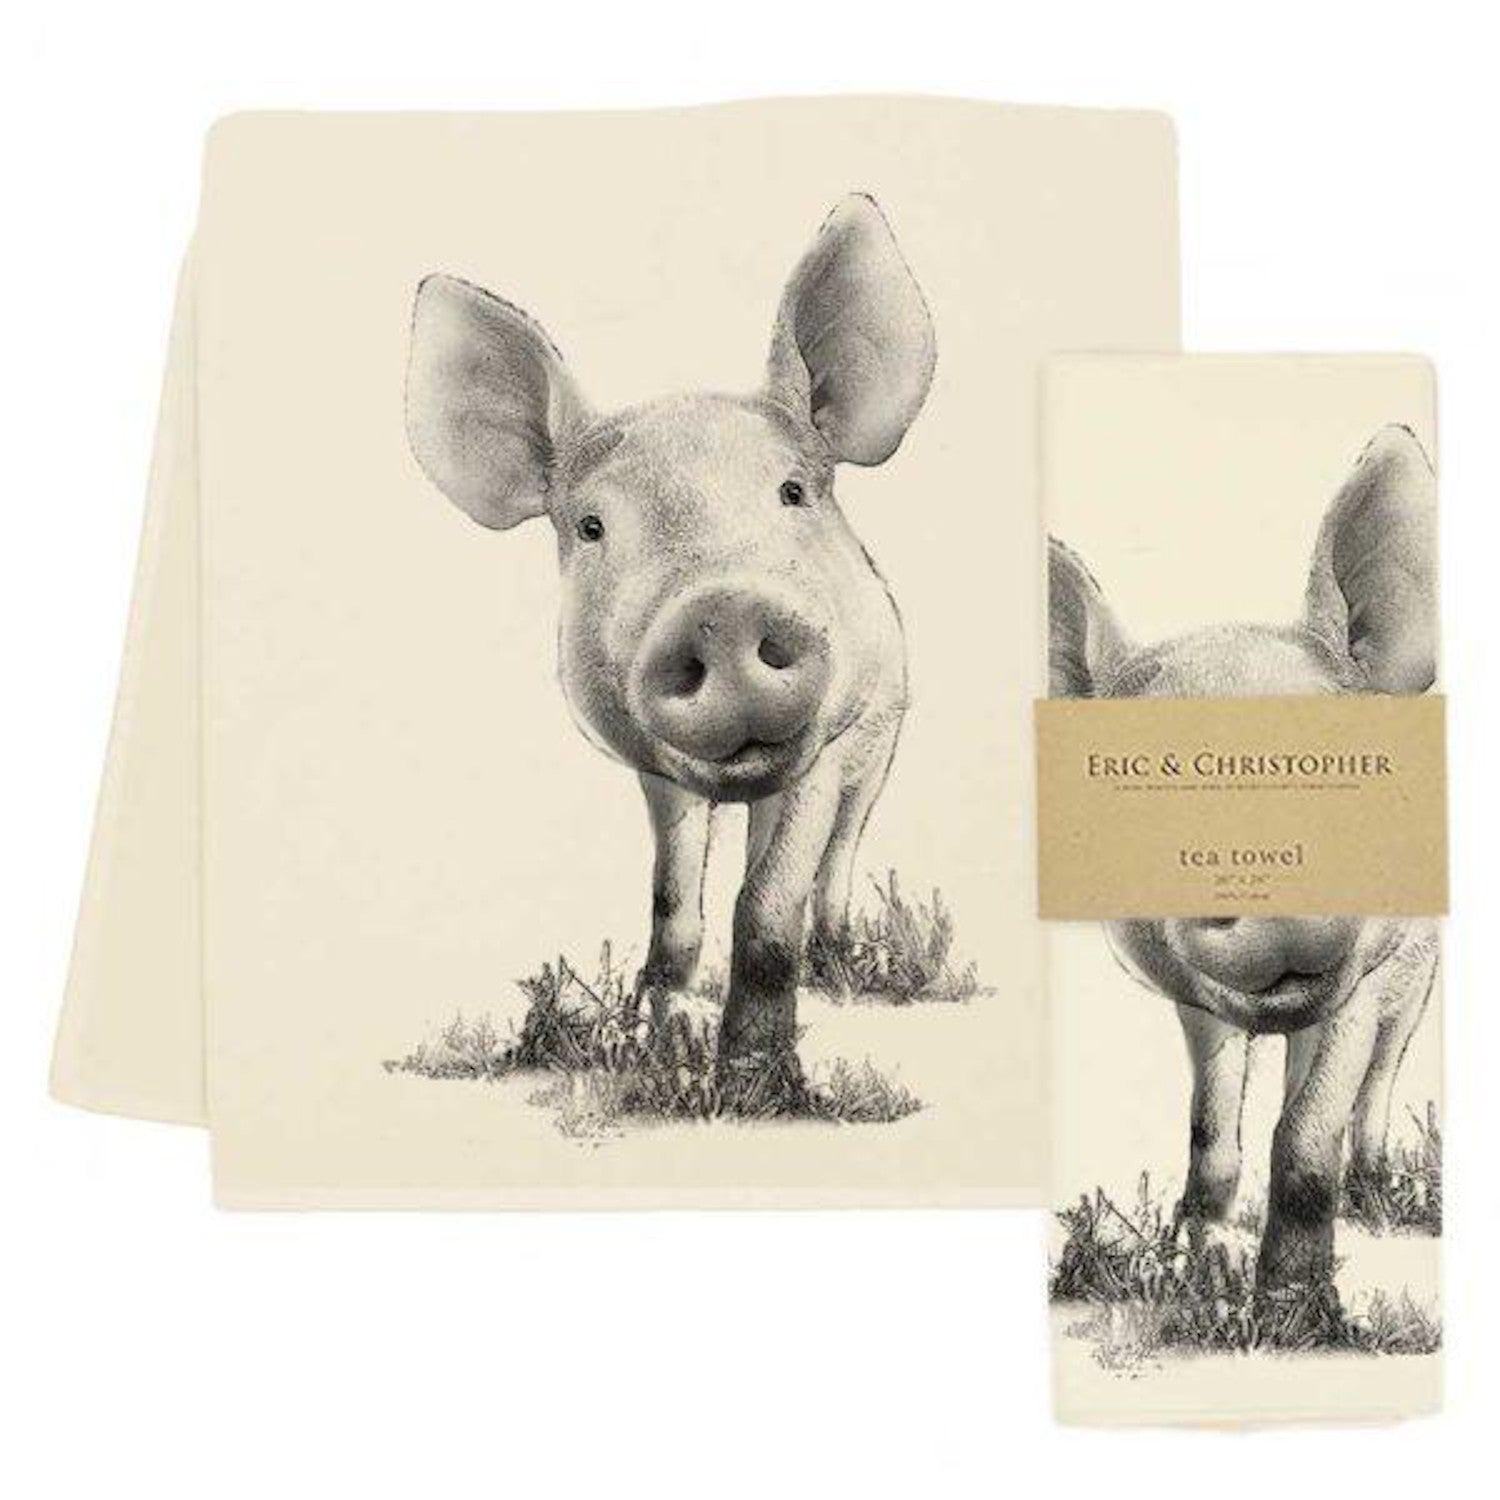 A black and white drawing of a pig on an Eric &amp; Christopher Piglet 